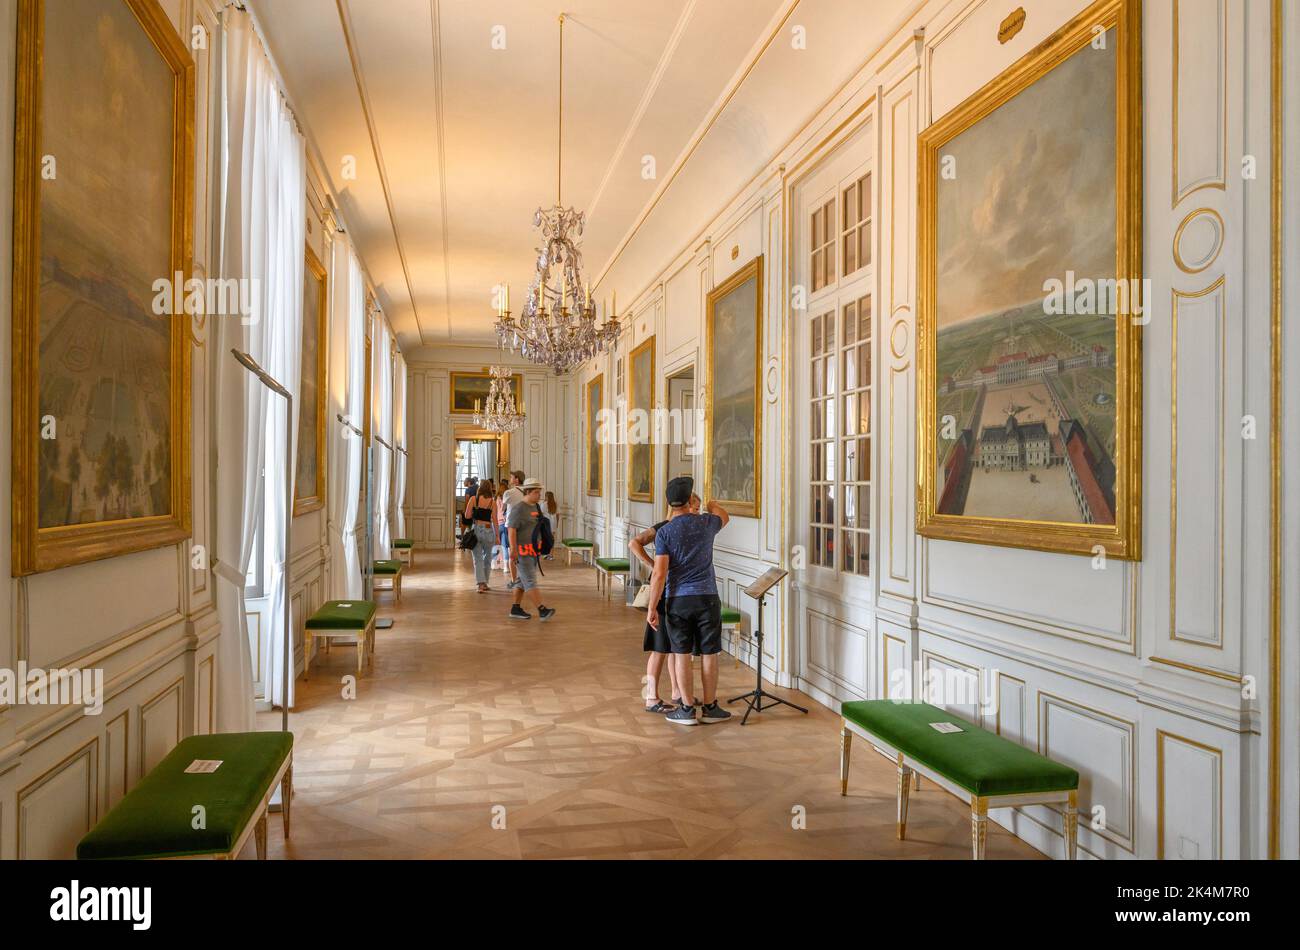 The South Gallery inside the Nymphenburg Palace (Schloss Nymphenburg), Munich, Bavaria, Germany Stock Photo